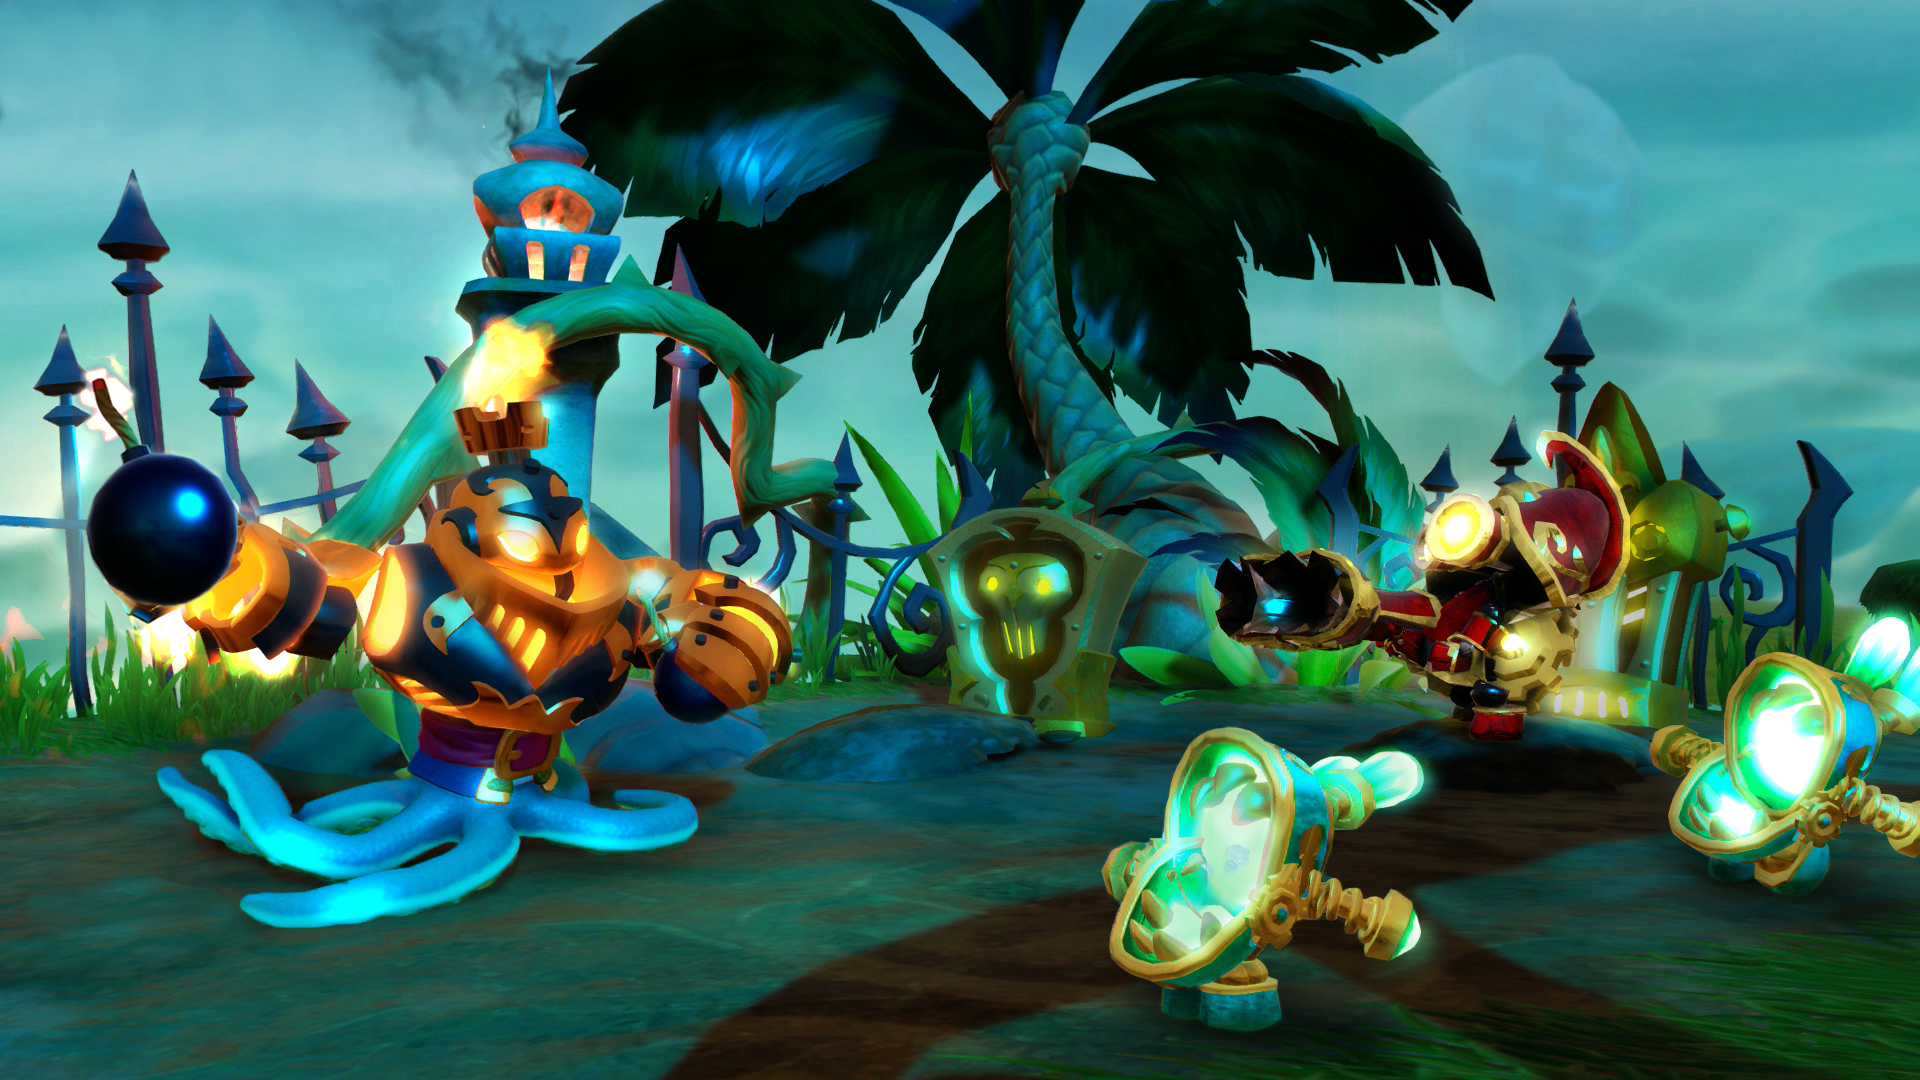 This Skylanders Swap Force Wallpaper Is Available In Sizes